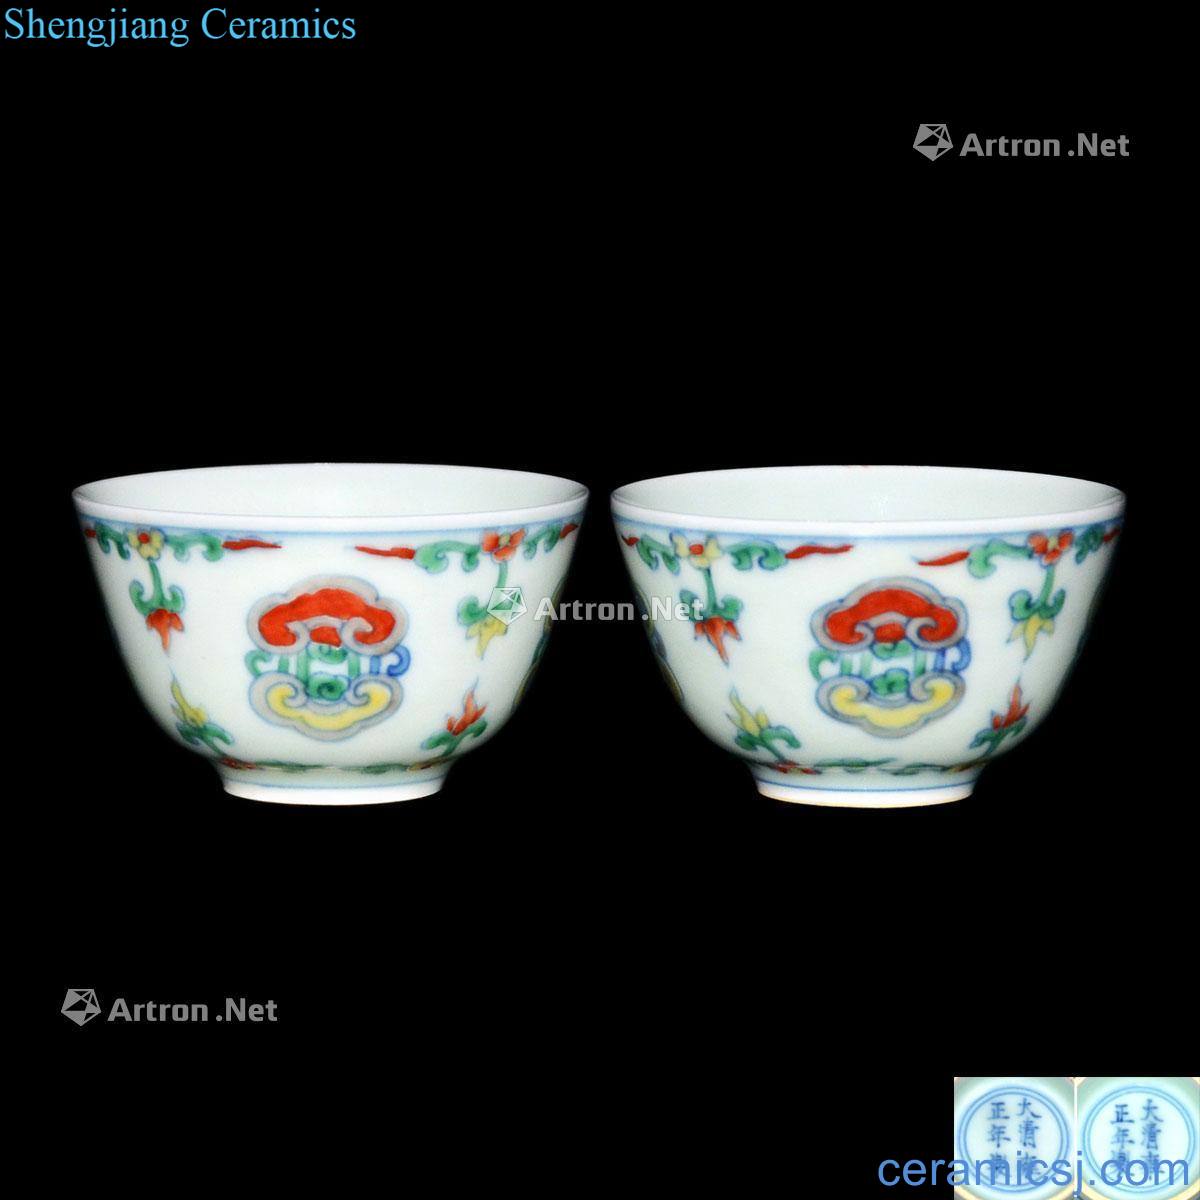 Qing yongzheng bucket color goes well with floral print cup (a)